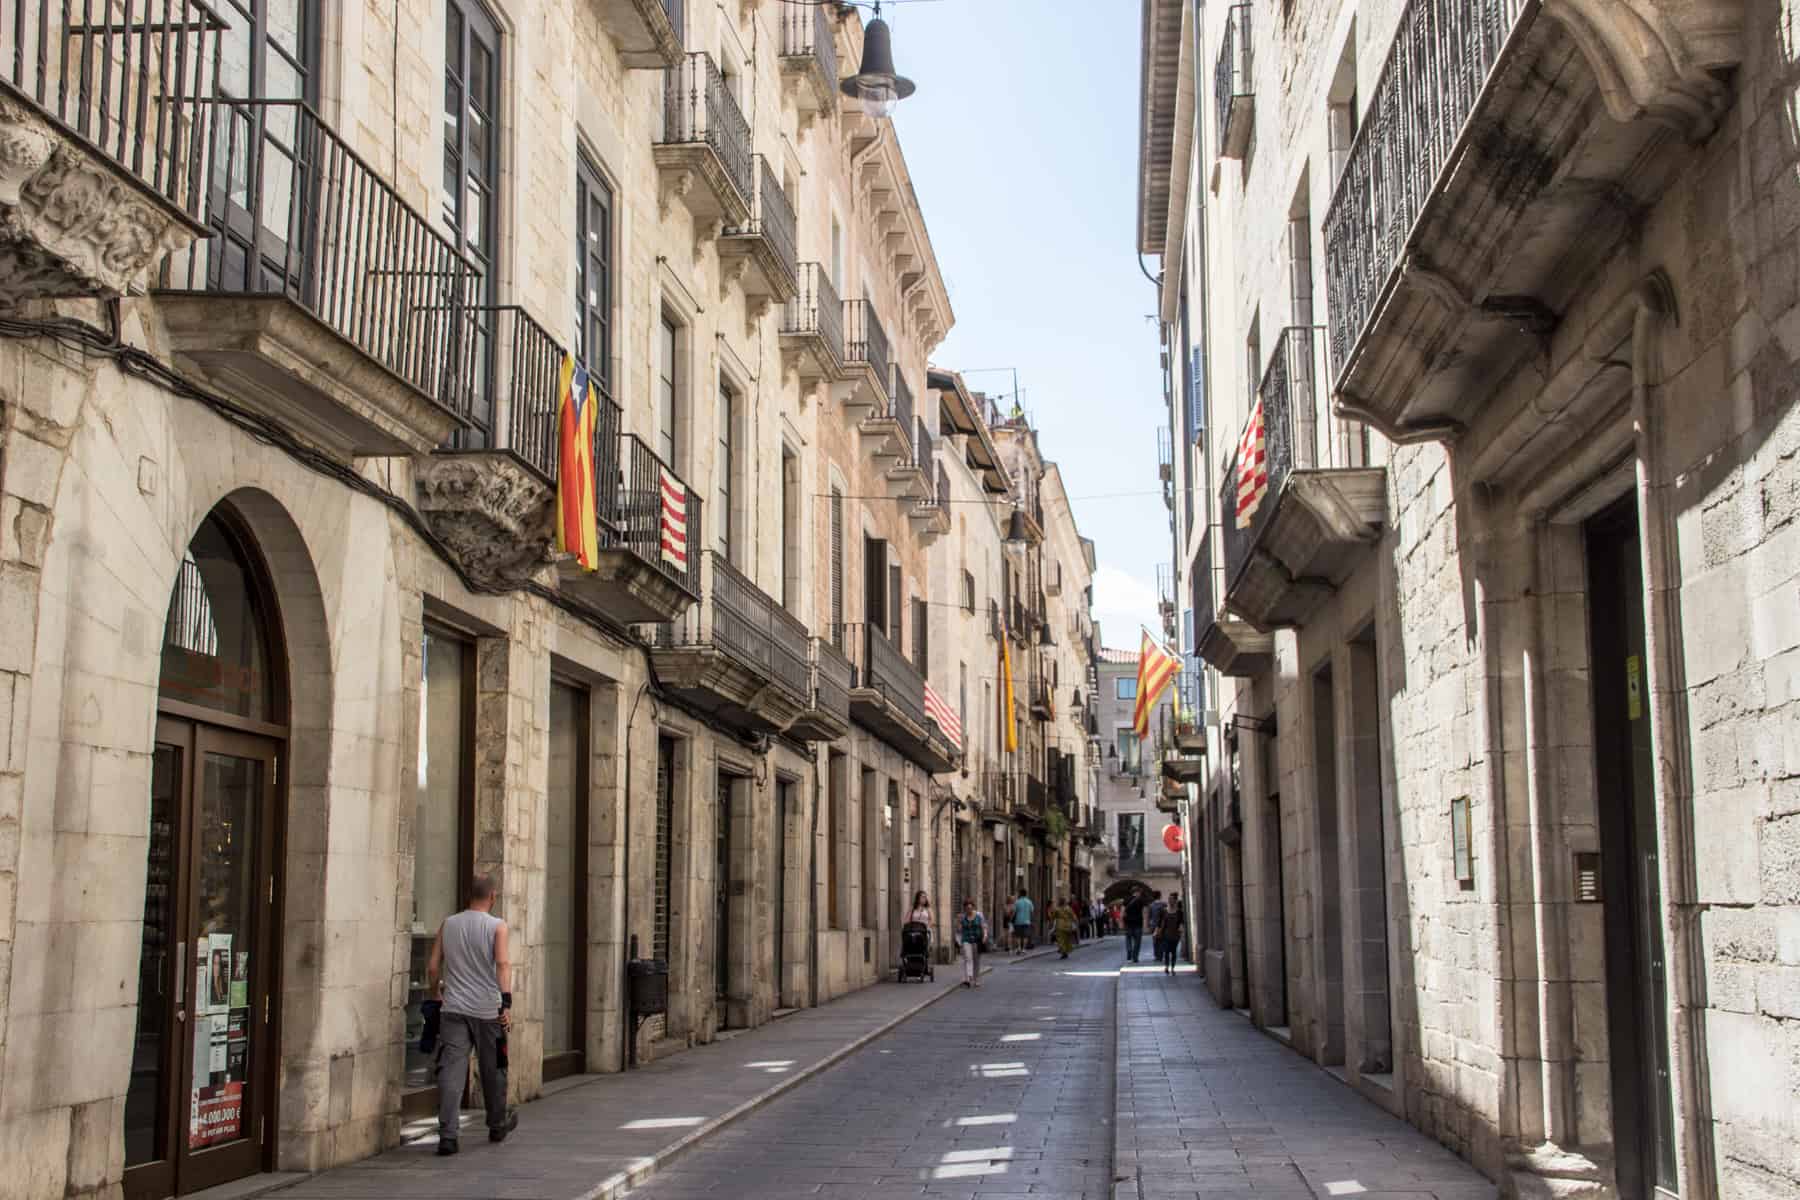 A paved street lined either side with creamy white stoned buildings. Some of the balconies have the Catalonia flag hanging from them, 